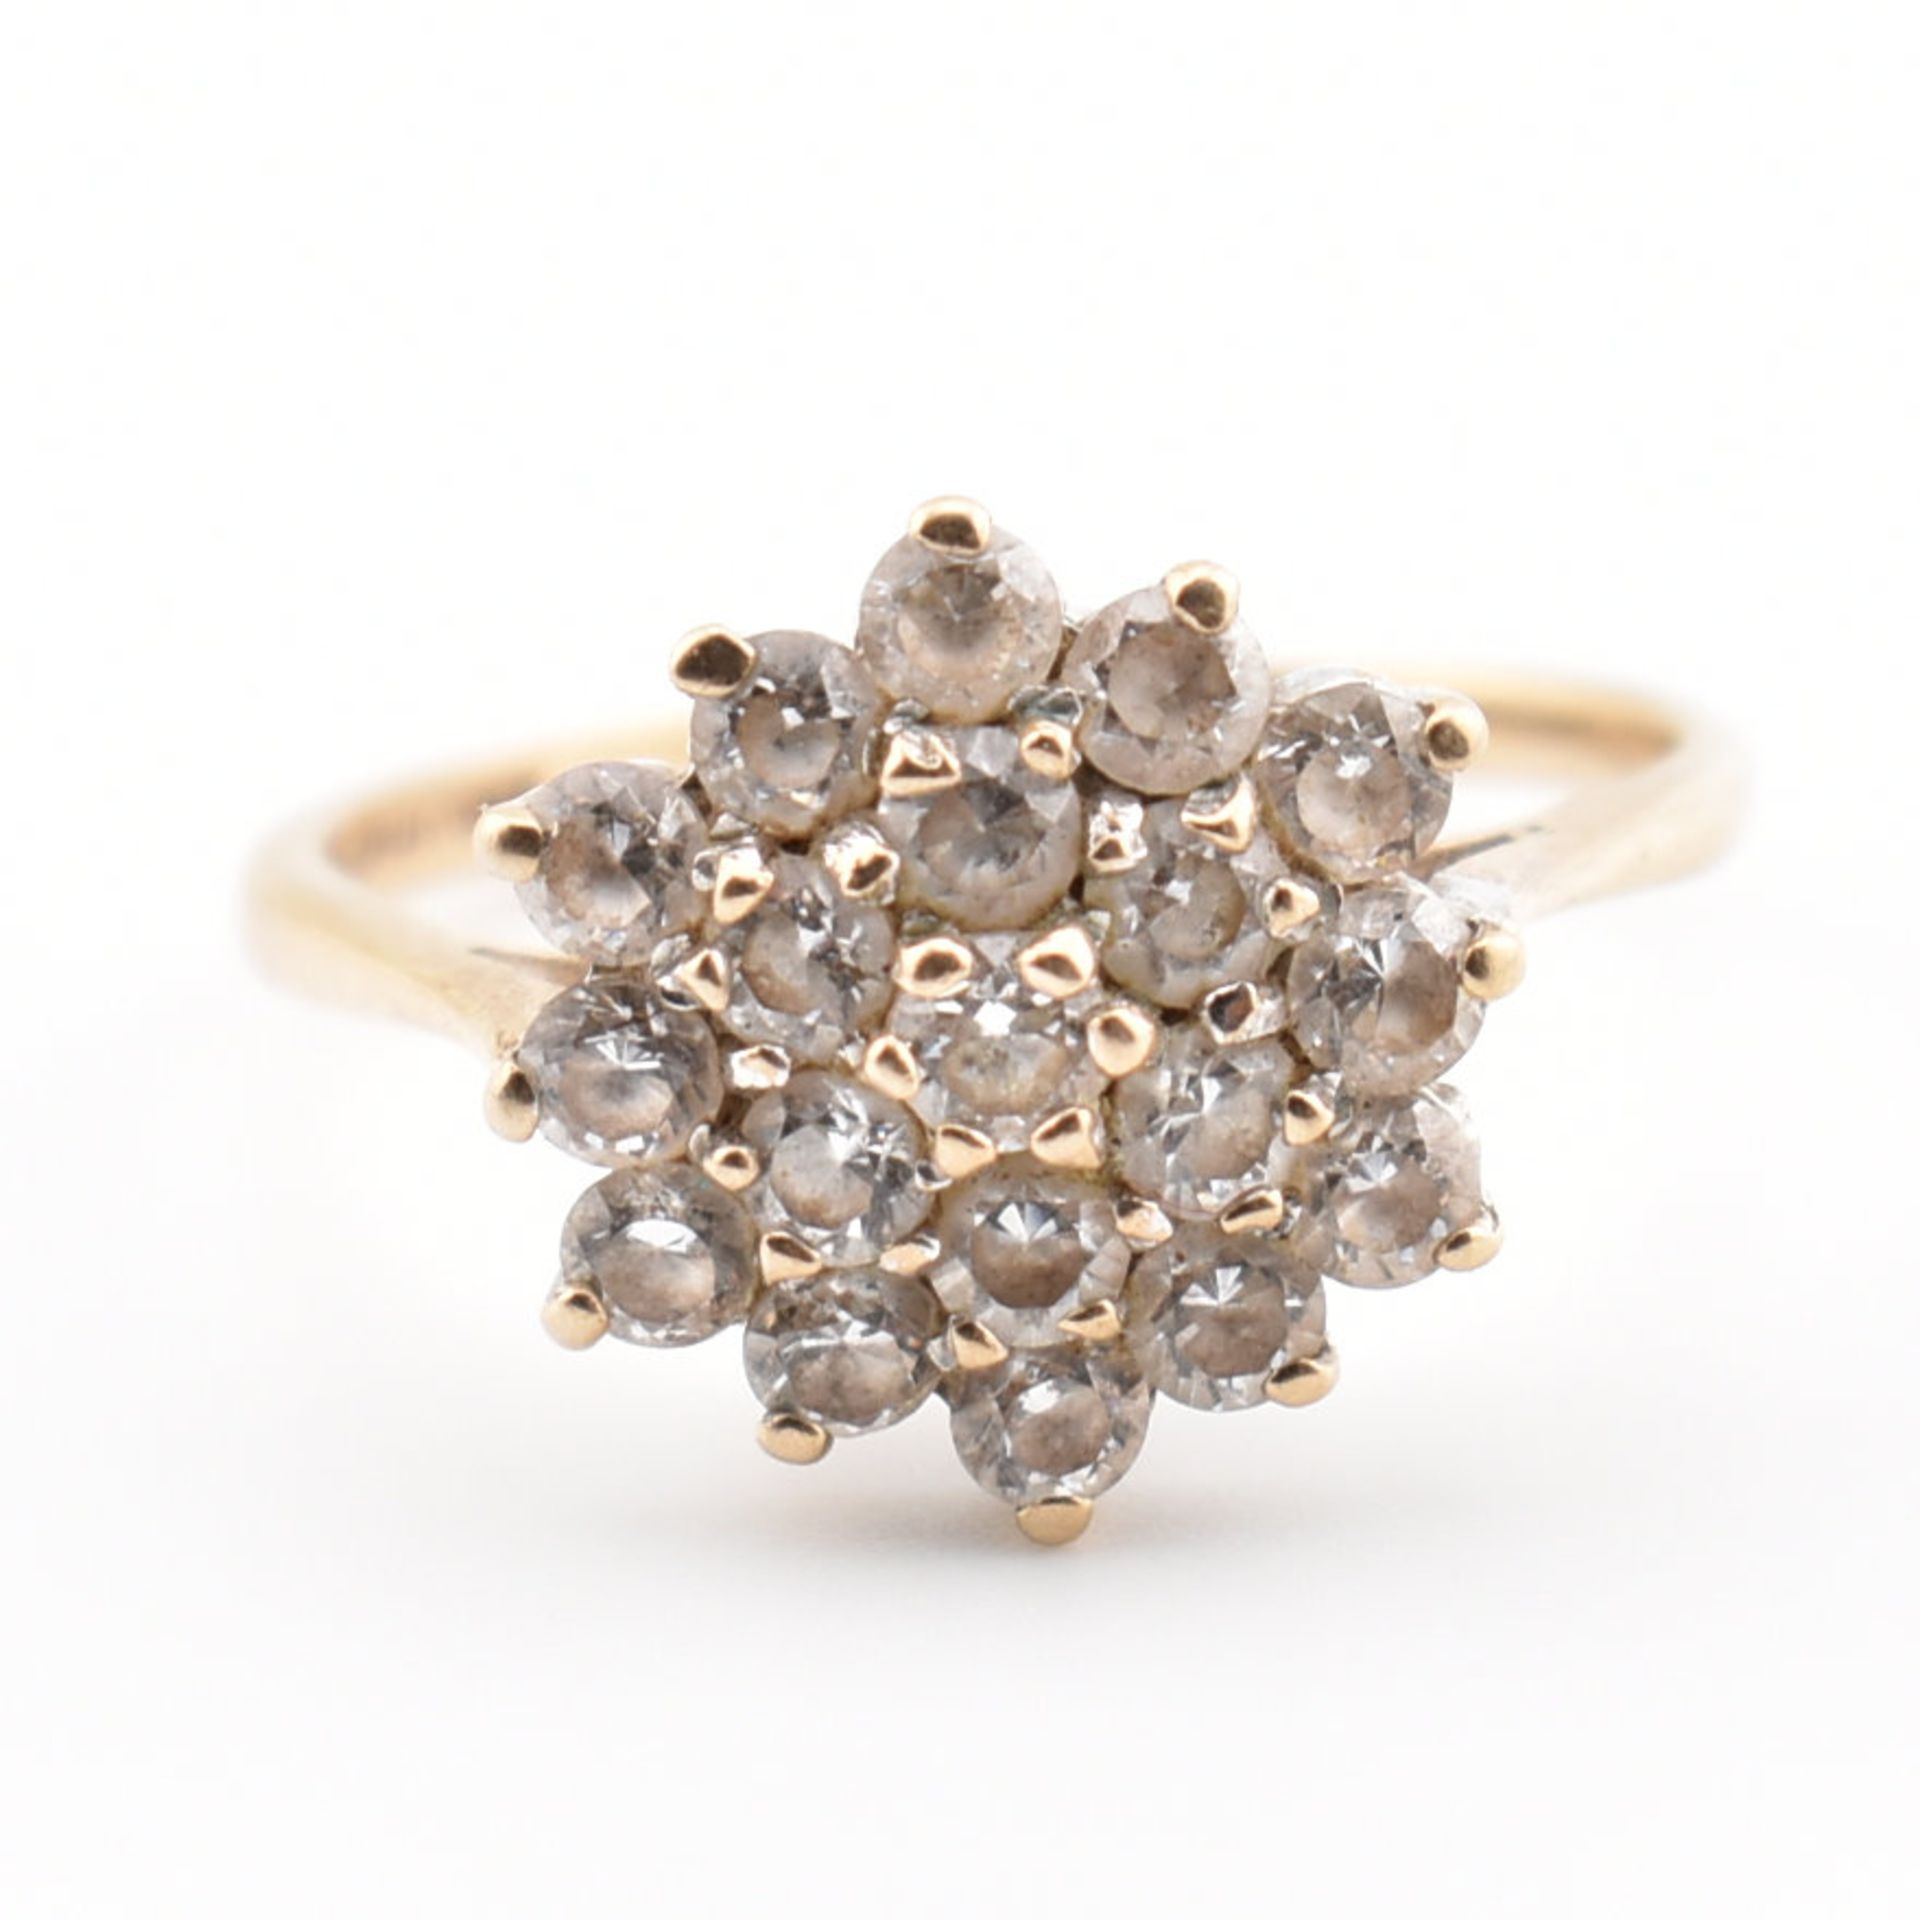 HALLMARKED 9CT GOLD & WHITE STONE CLUSTER RING